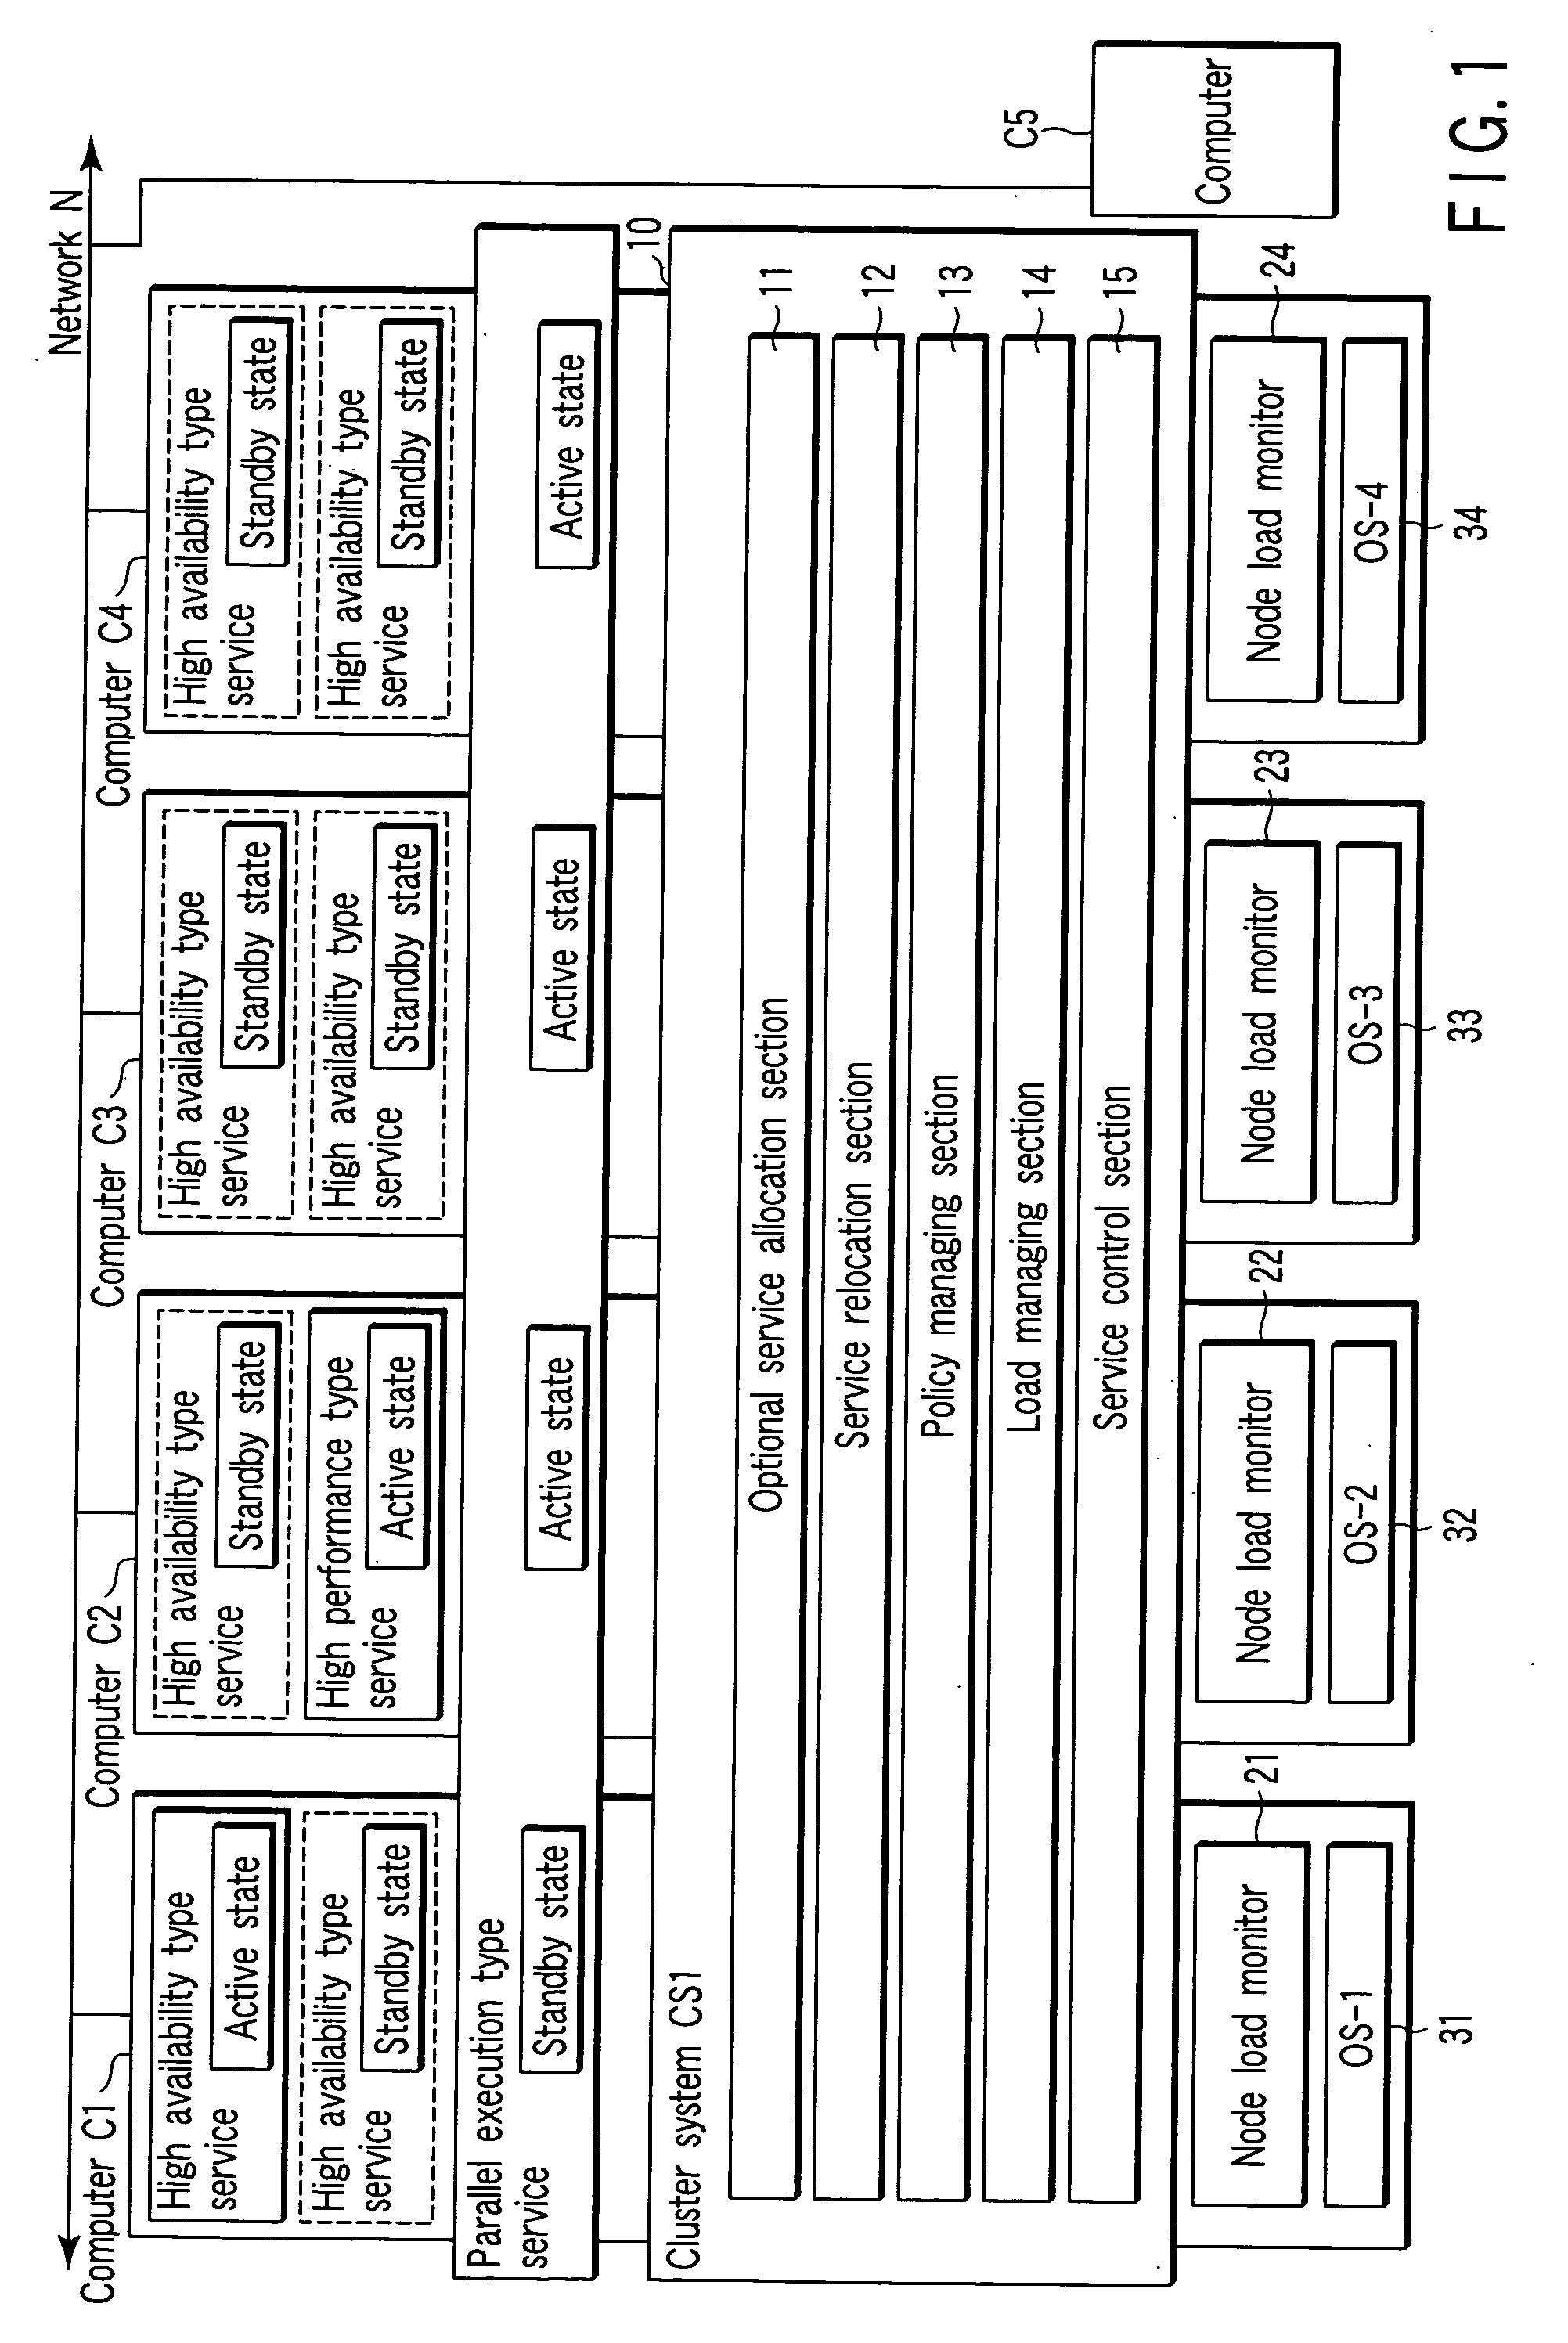 Computer system and cluster system program